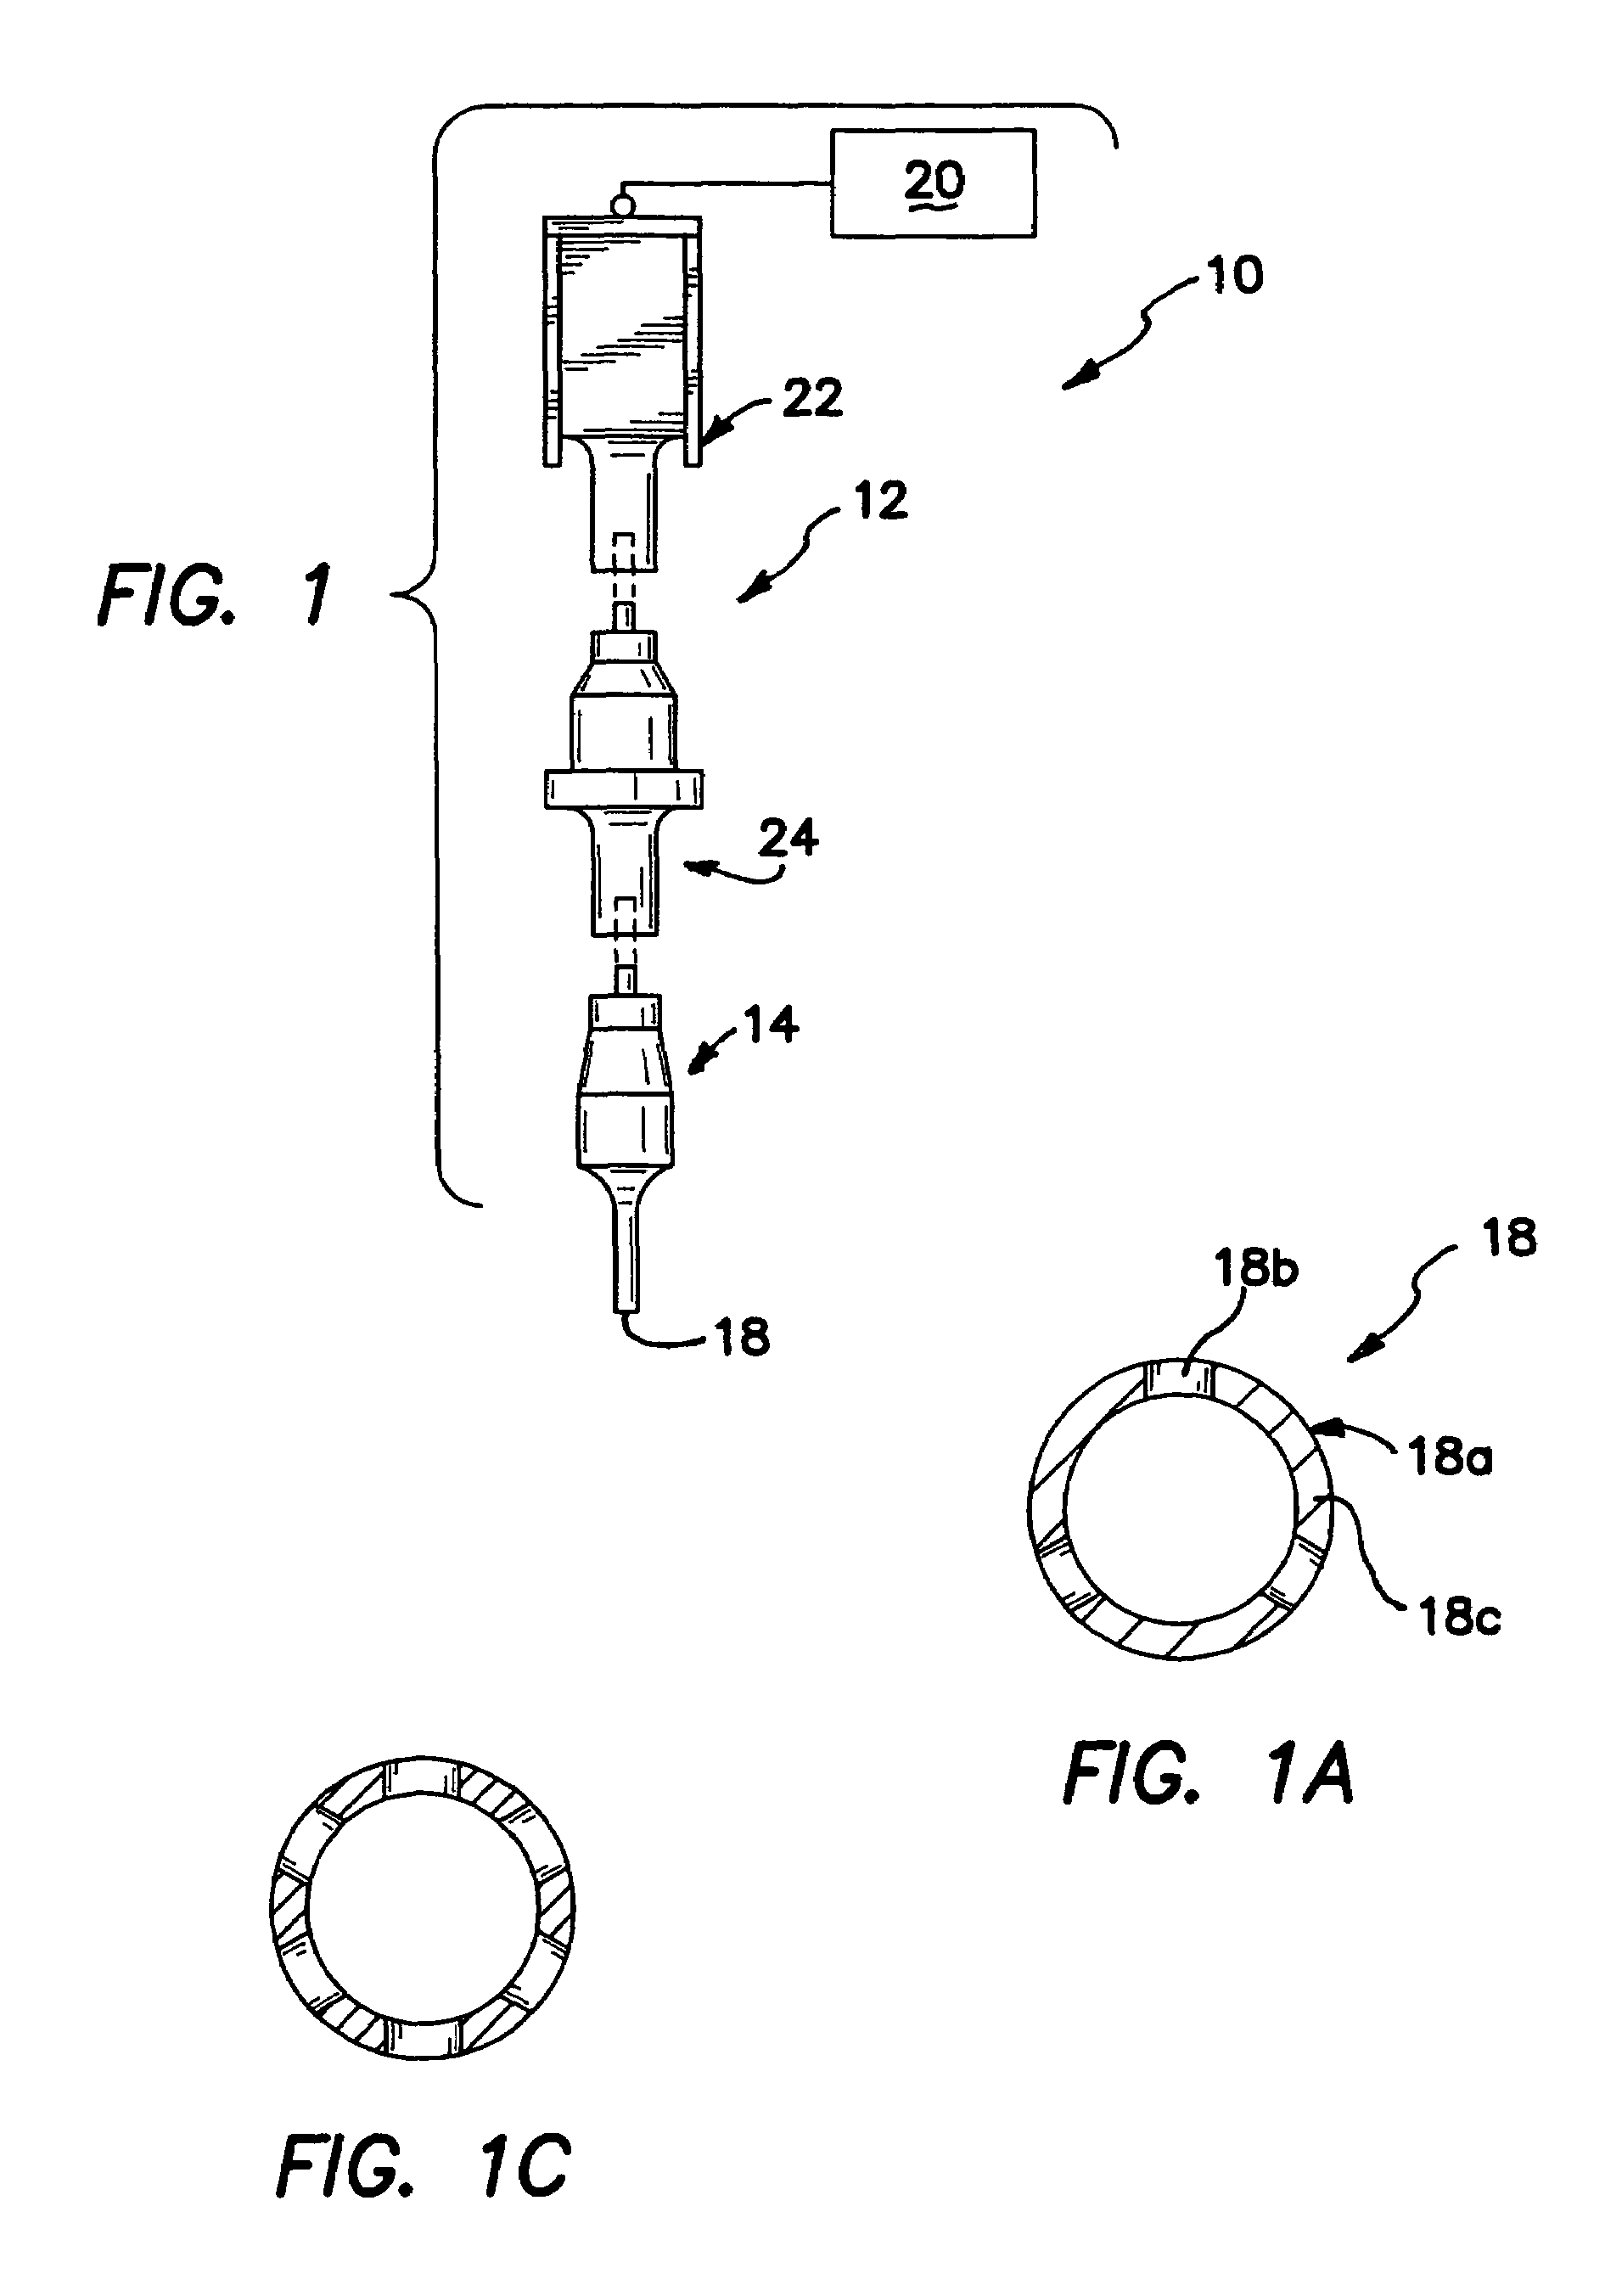 Contact lens mold assemblies and systems and methods of producing same